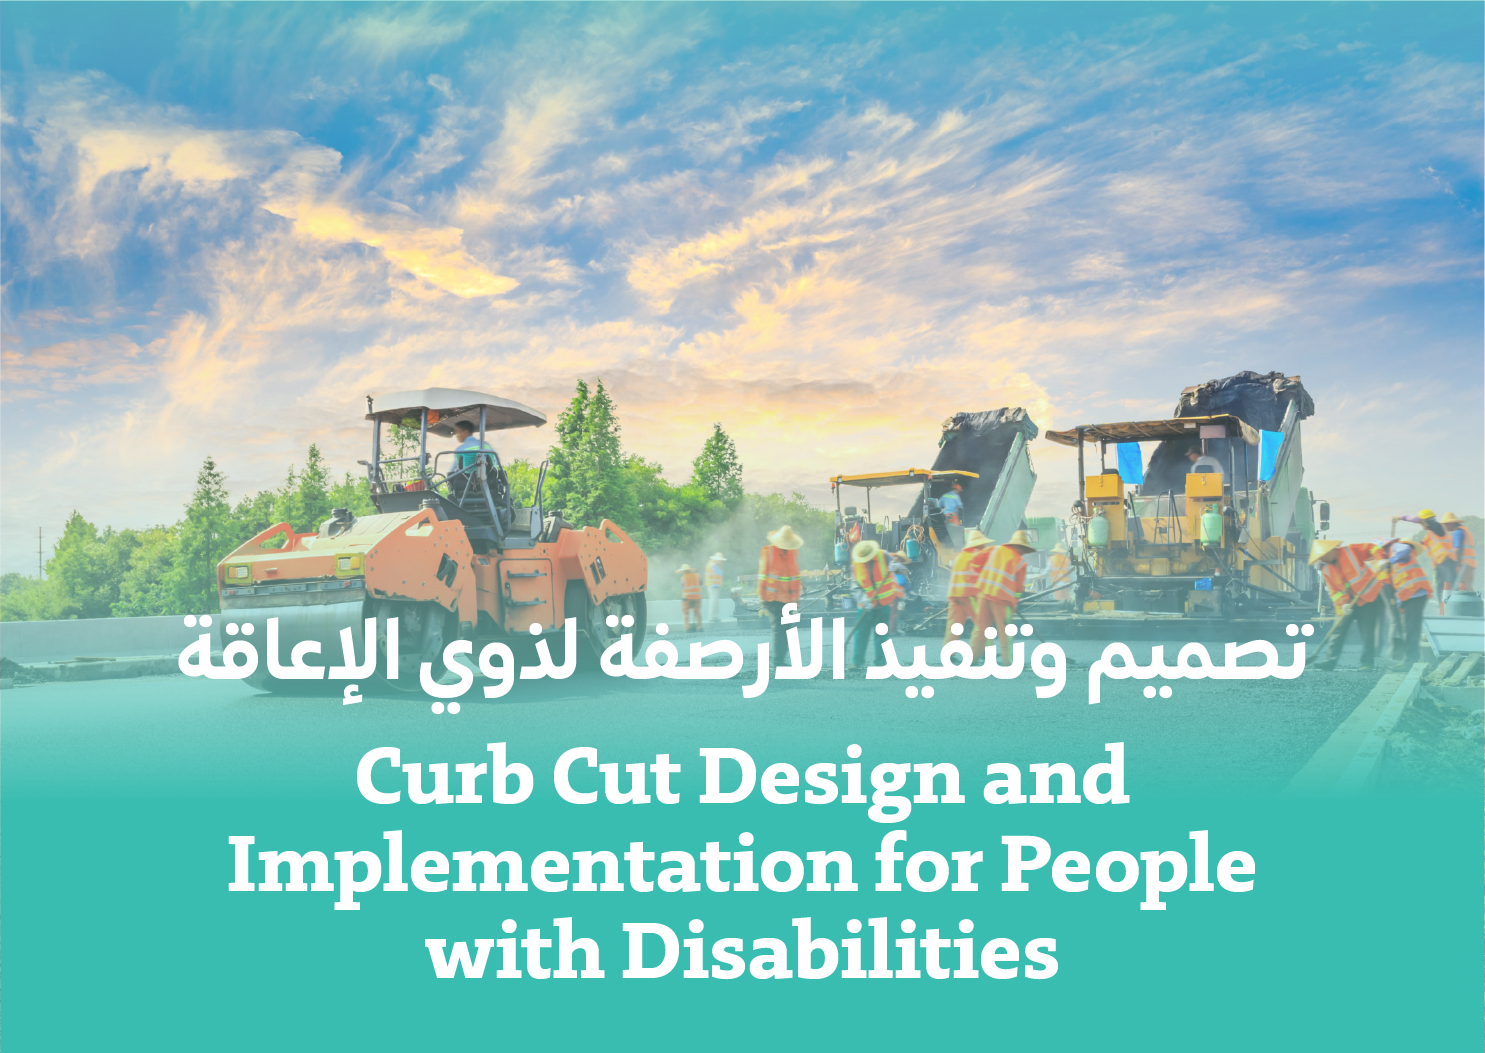 Curb Cut Design and Implementation for People with Disabilities